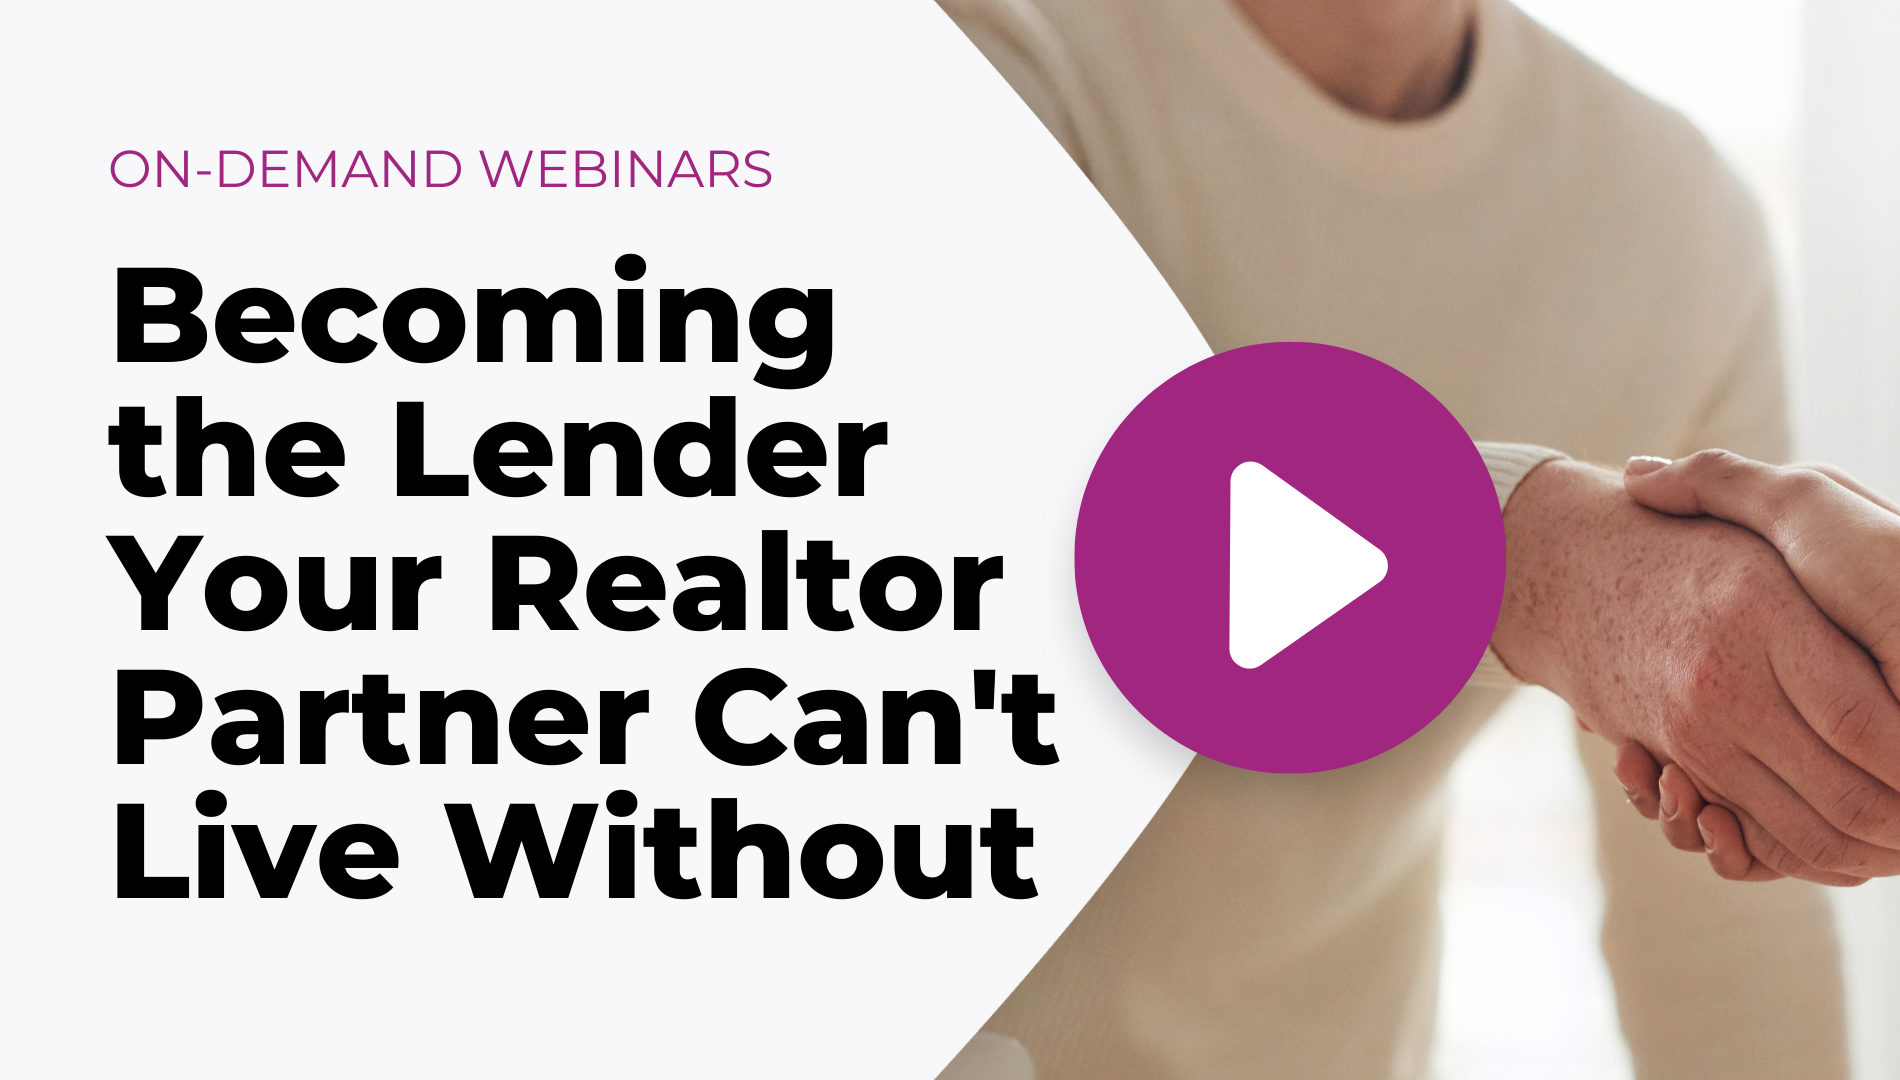 Becoming the Lender Your Realtor Partner Can